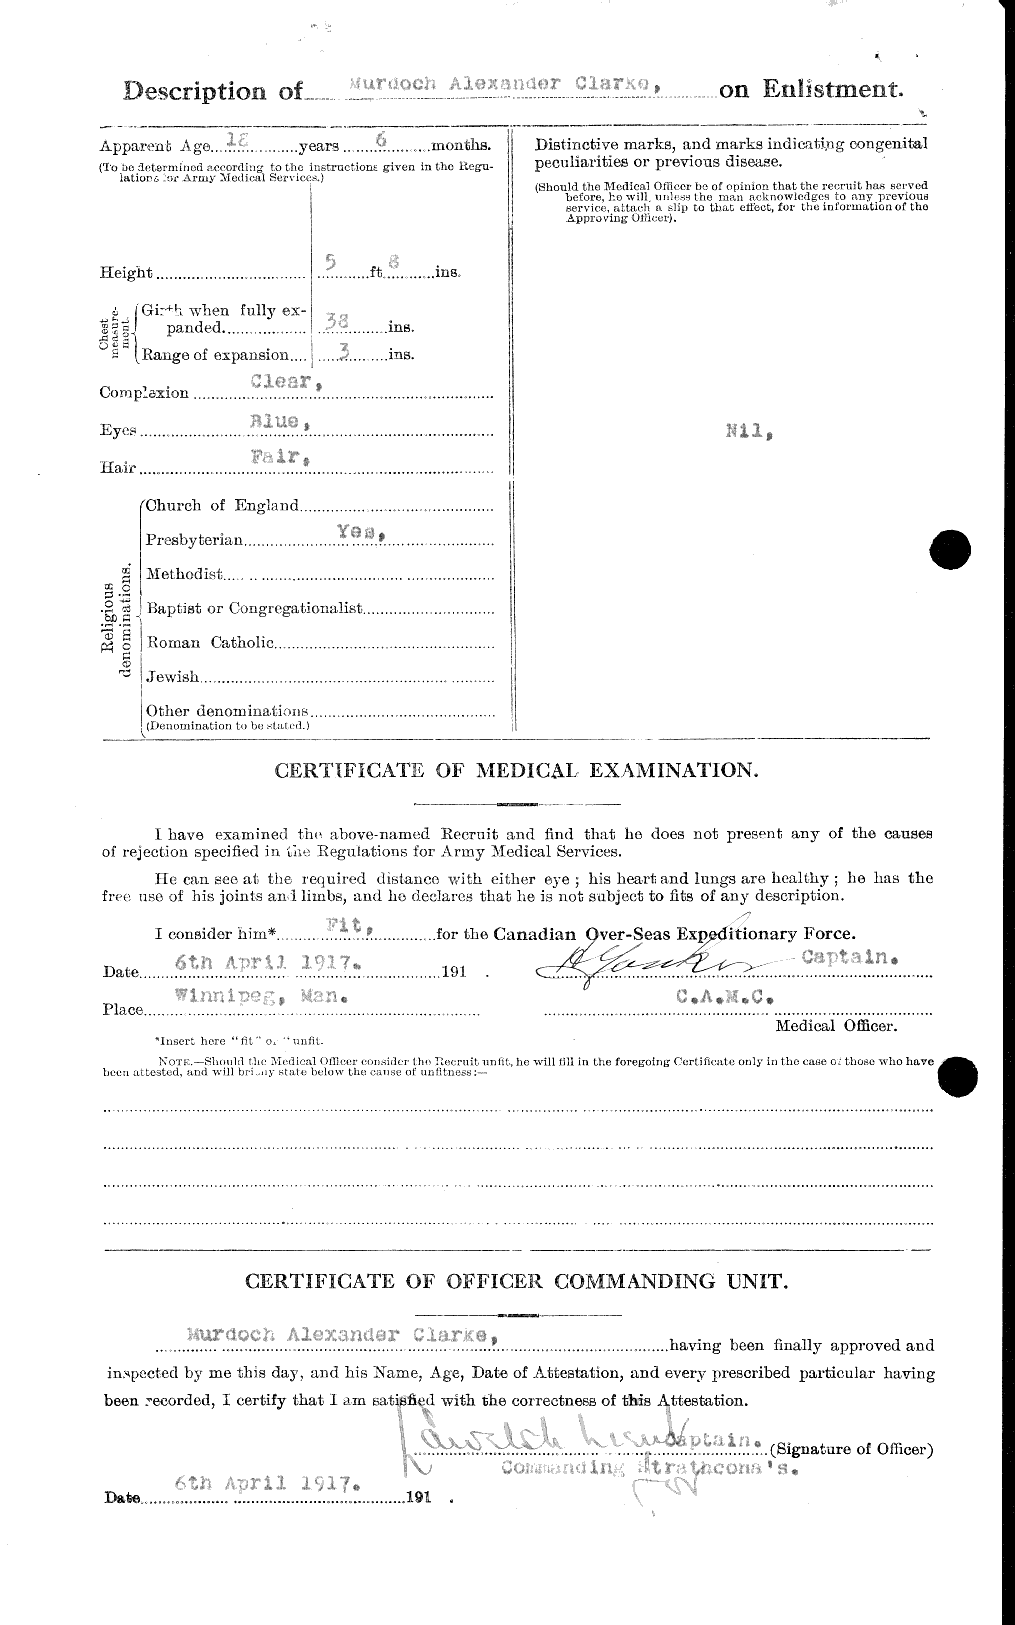 Personnel Records of the First World War - CEF 023454b